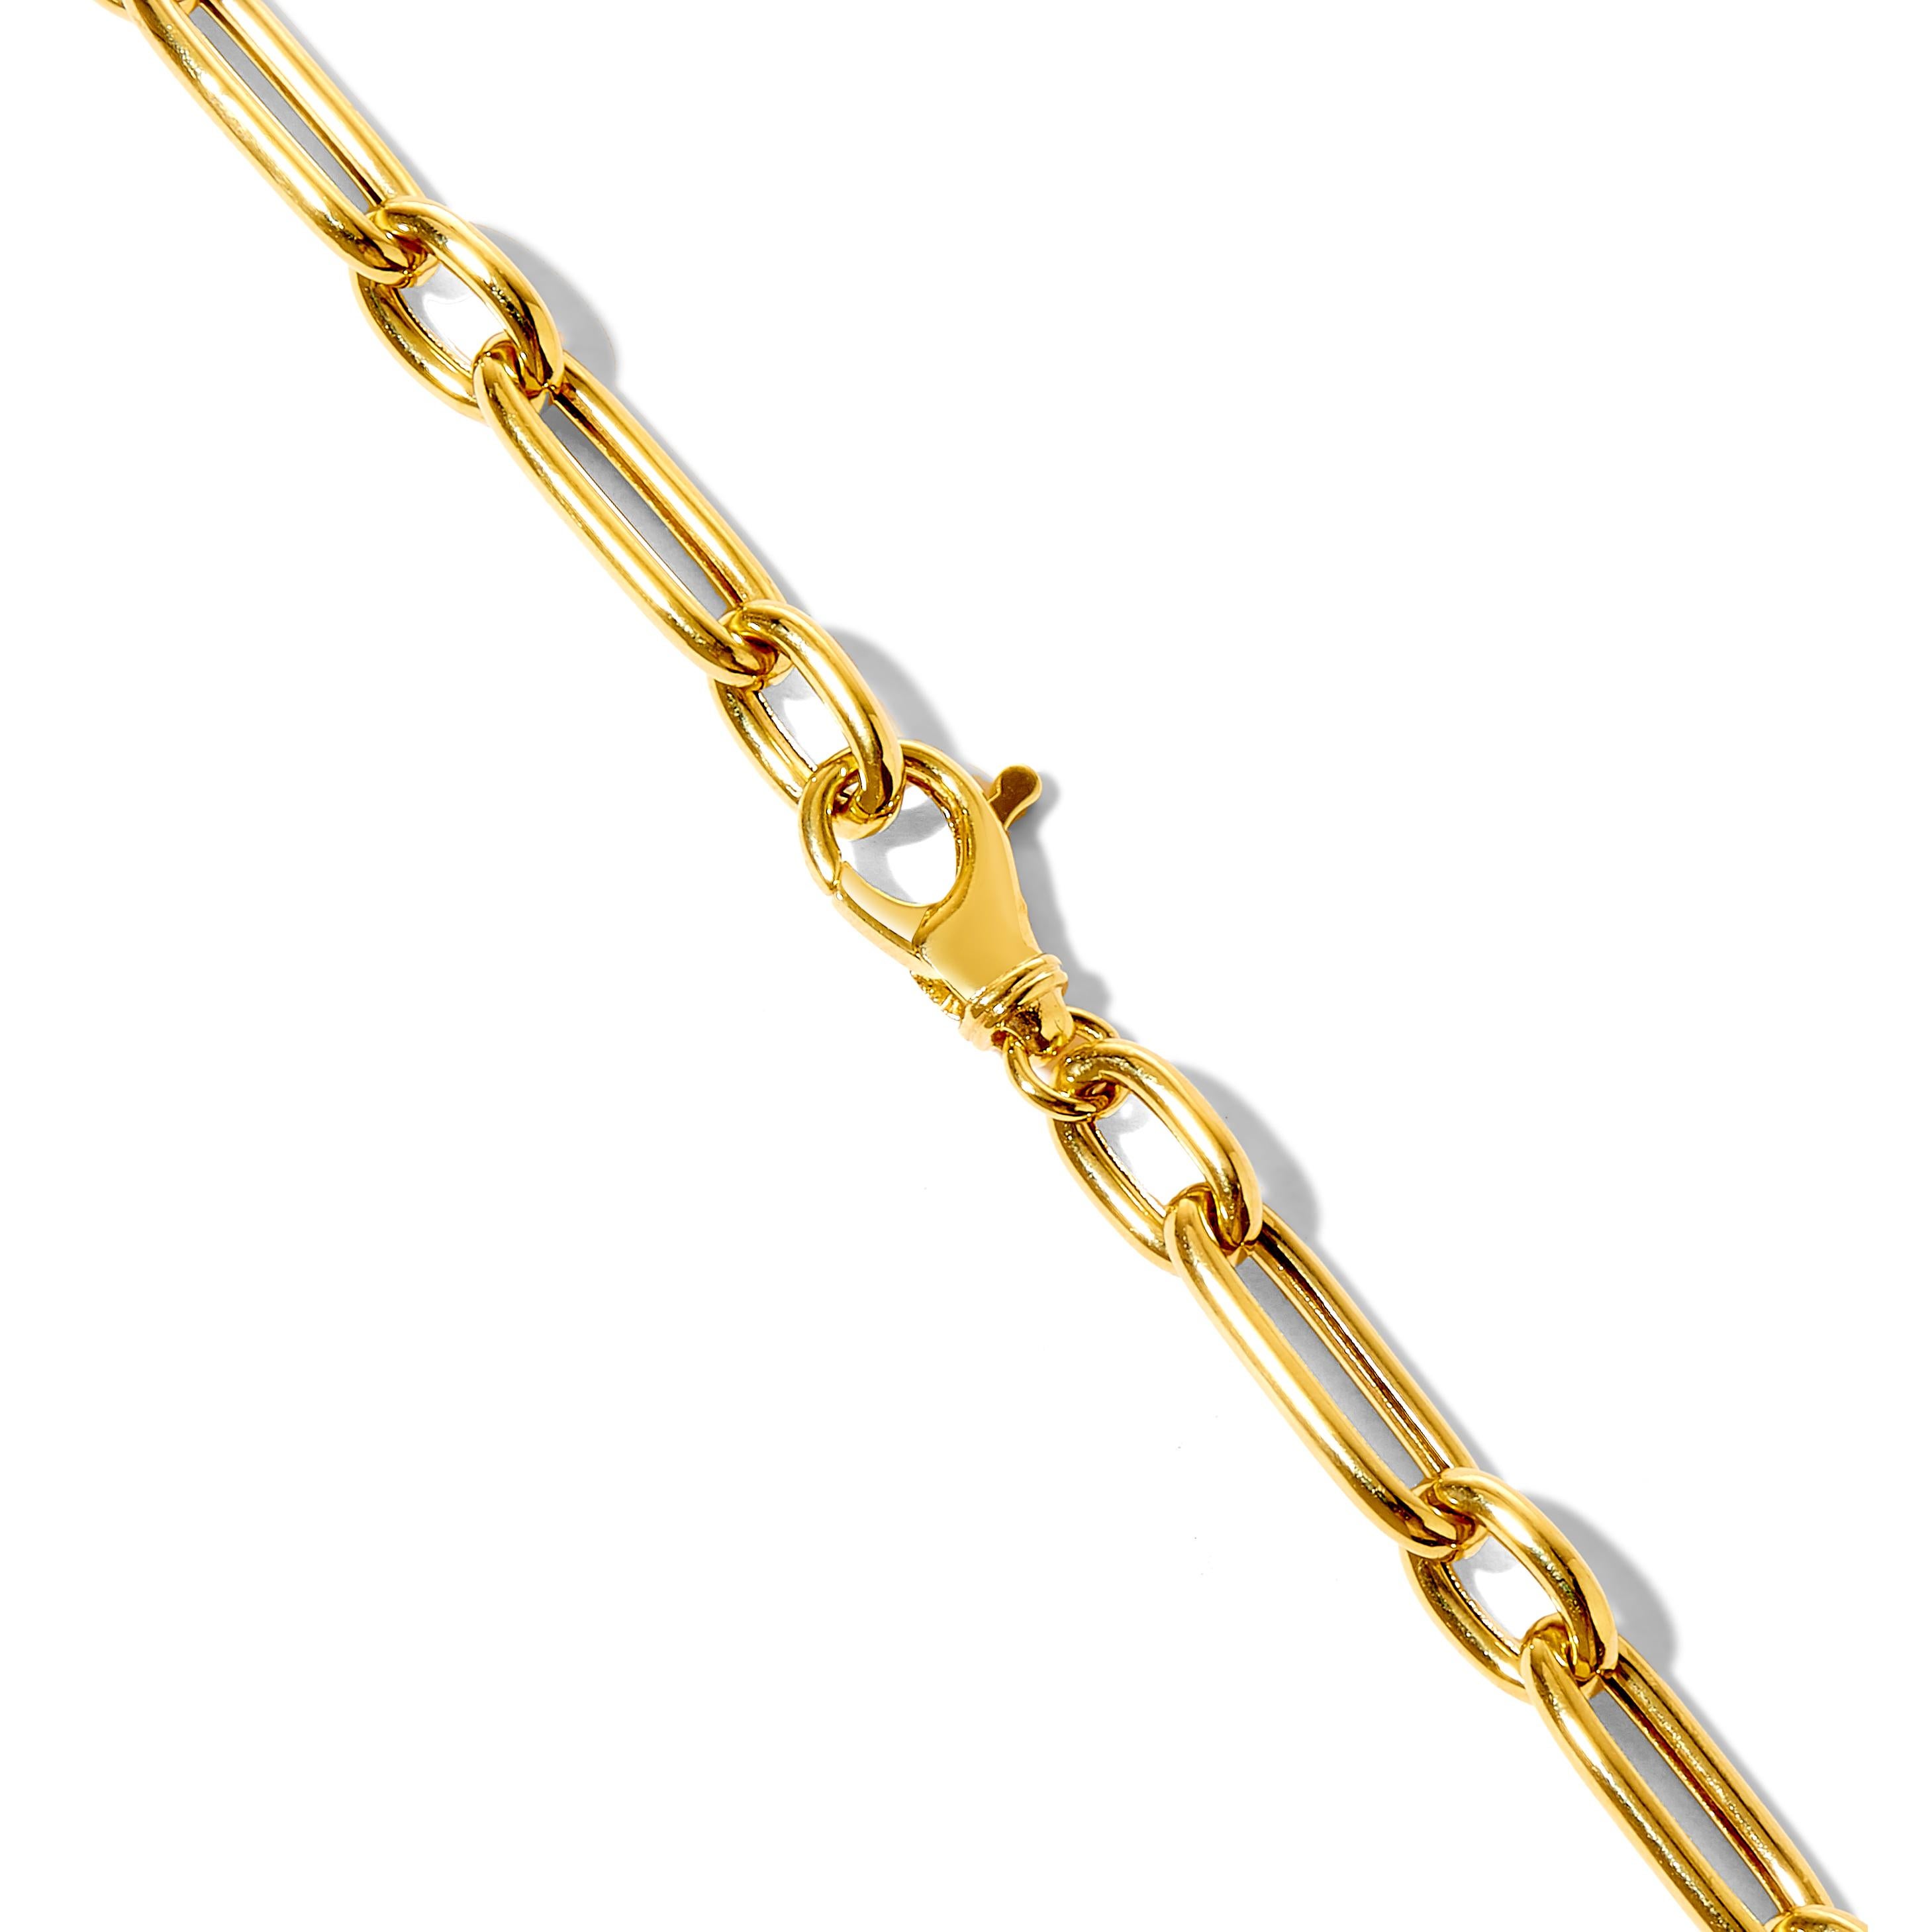 Created in 18 karat yellow gold
White agate 7 carats approx.
8 inch length
18 karat yellow gold lobster clasp
Bracelet can be clasped at any length
Also available in various lengths

Crafted from 18-karat yellow gold, this bracelet dazzles with a